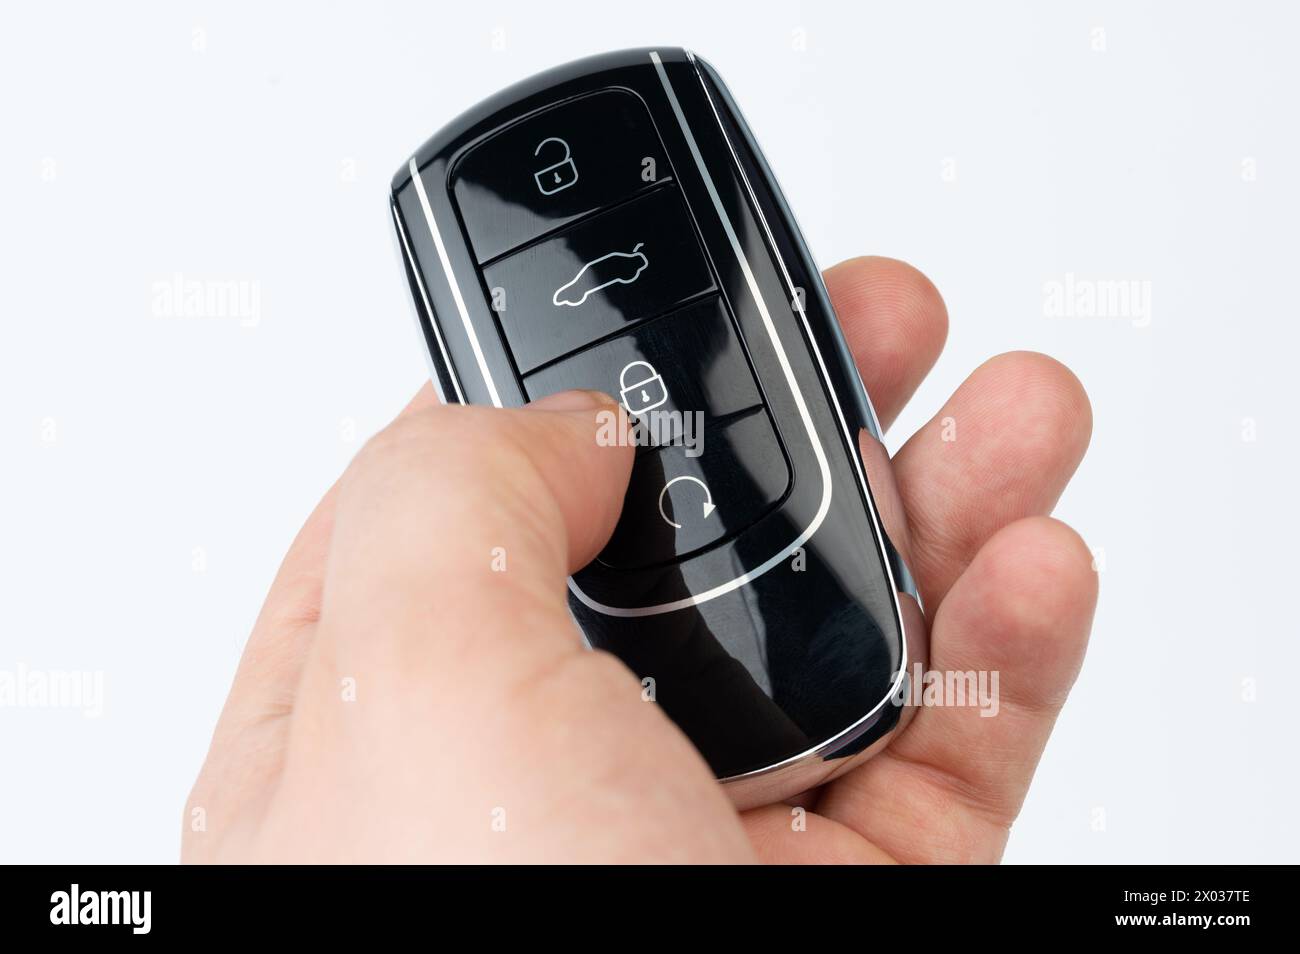 Lock car with key  in hand isolated close up view Stock Photo